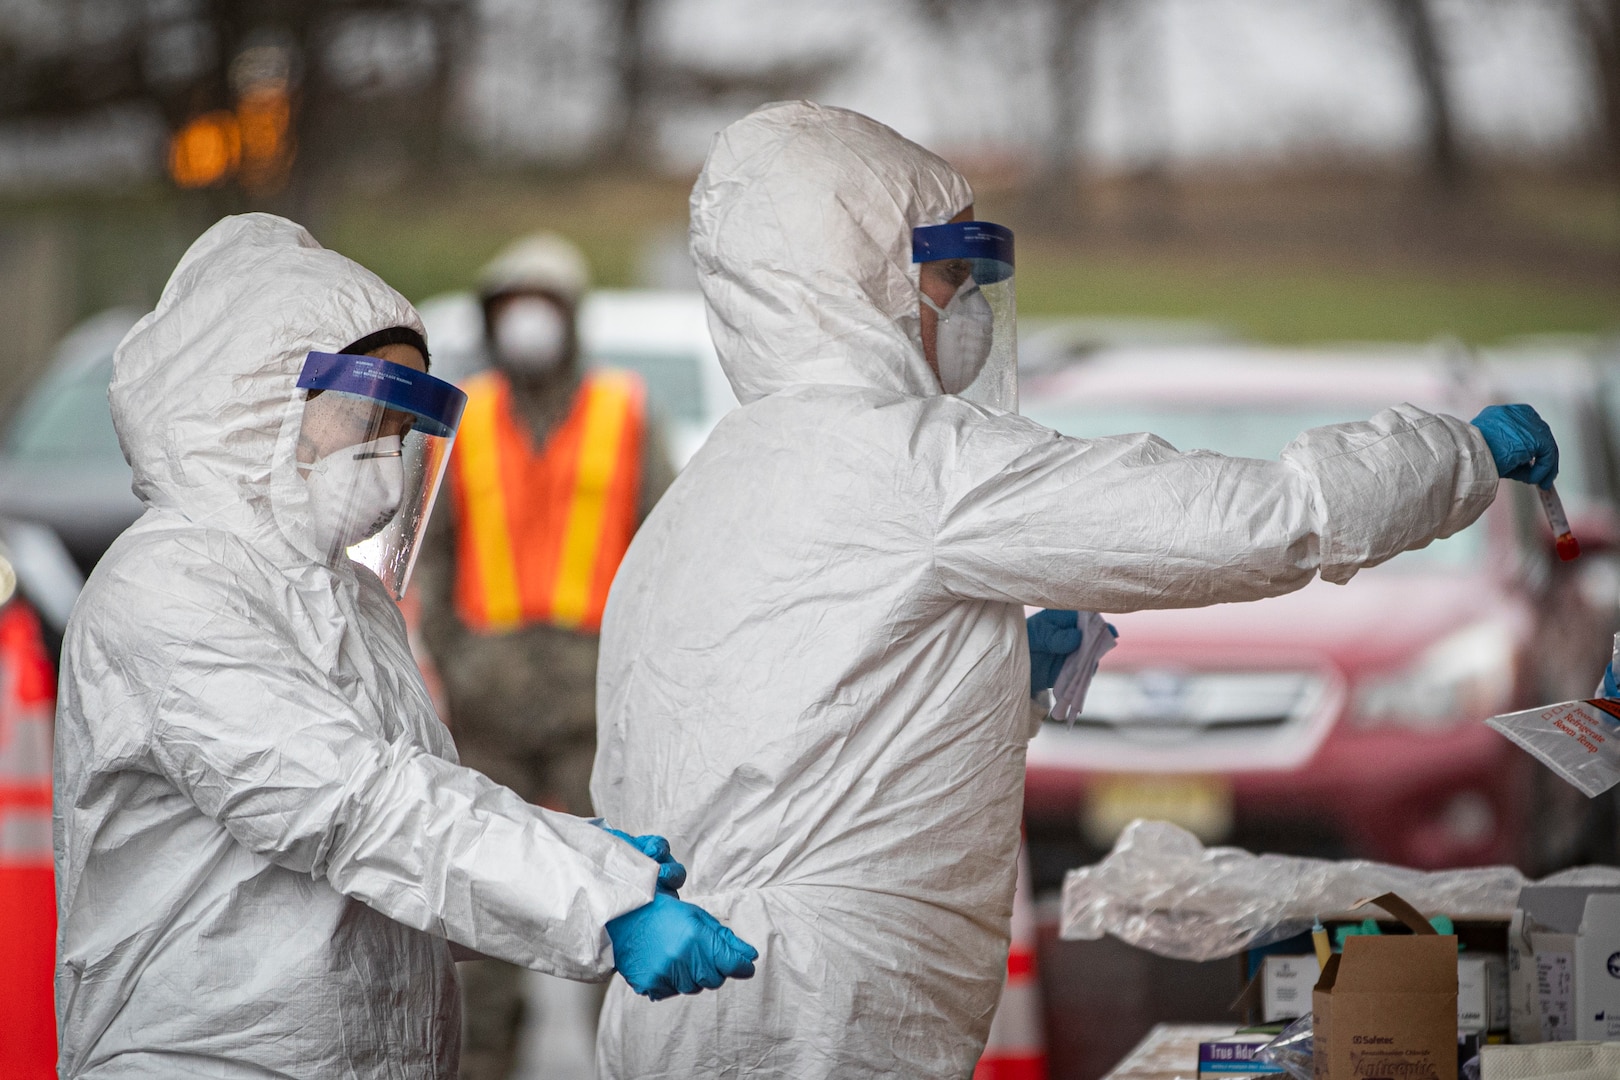 New Jersey Air National Guard medics with the 108th Wing process specimens at a COVID-19 testing site at the PNC Bank Arts Center in Holmdel, N.J., March 23, 2020. The site, established with the Federal Emergency Management Agency, is staffed by the New Jersey Department of Health, the New Jersey State Police and the New Jersey National Guard.